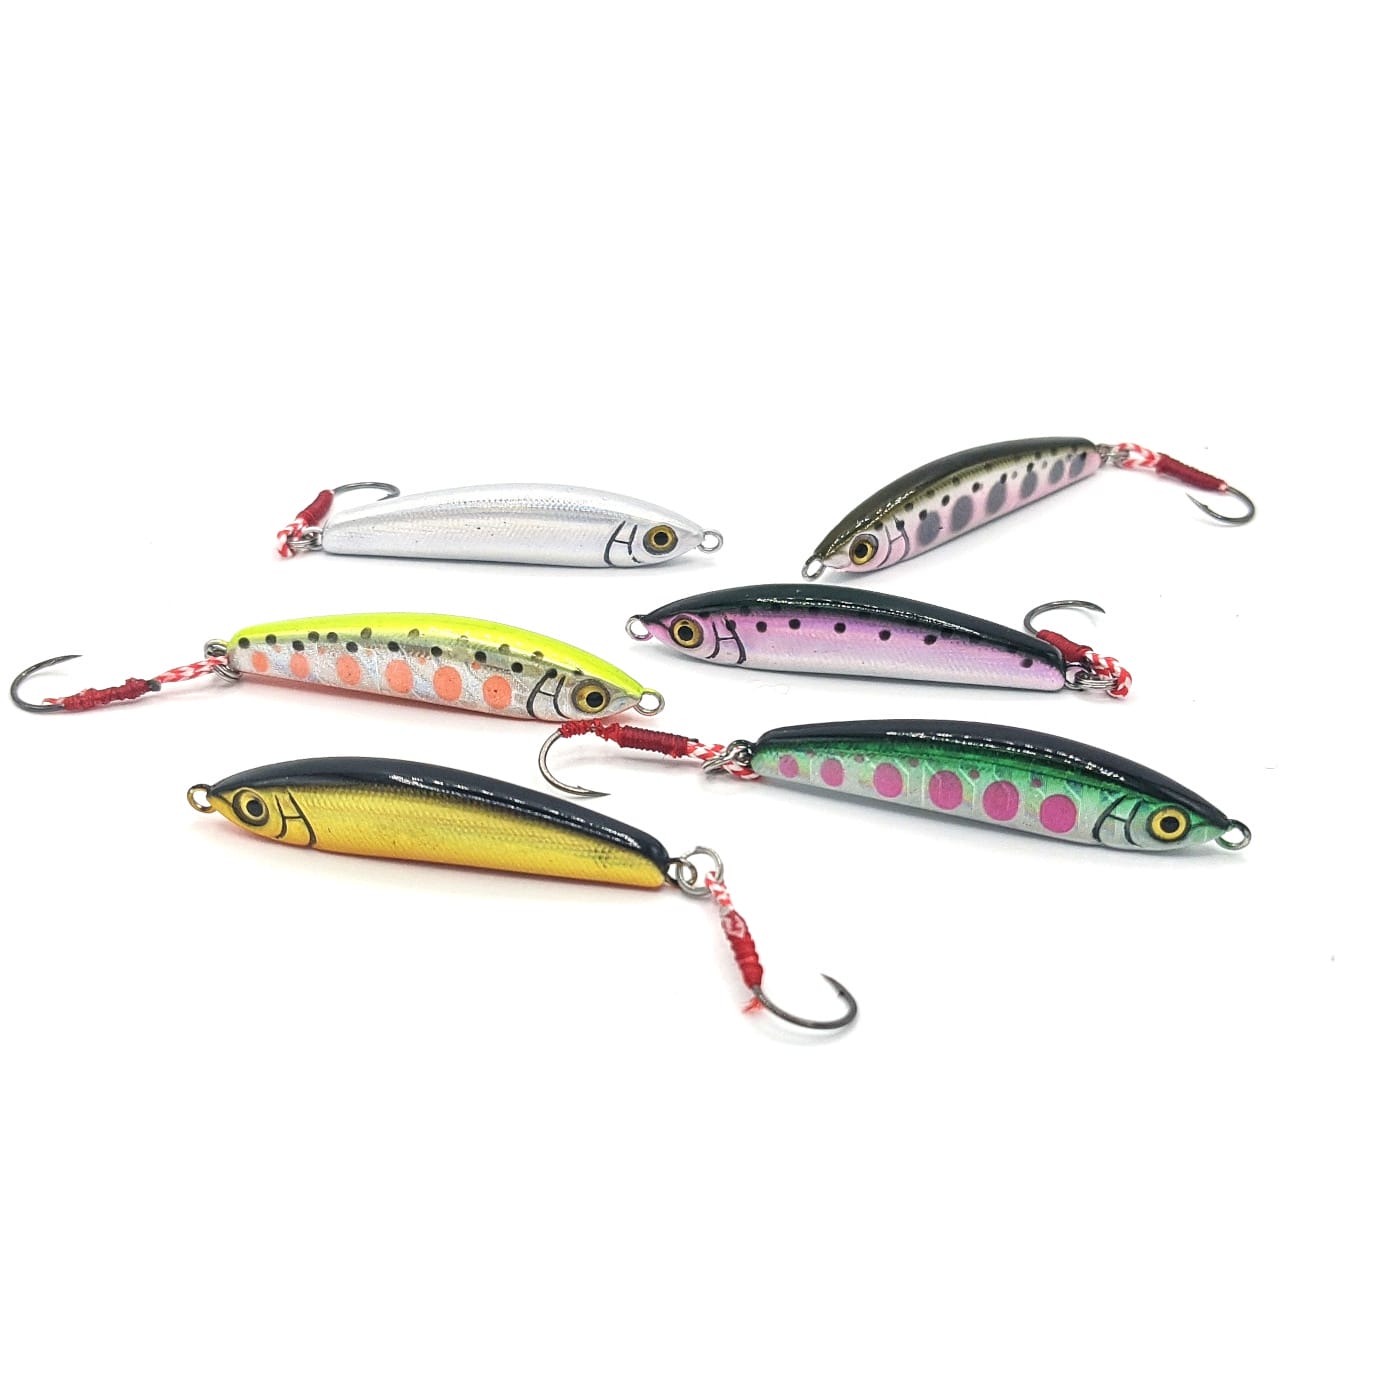 Bait Finesse Empire Shimmy Minnow - 3-Pack